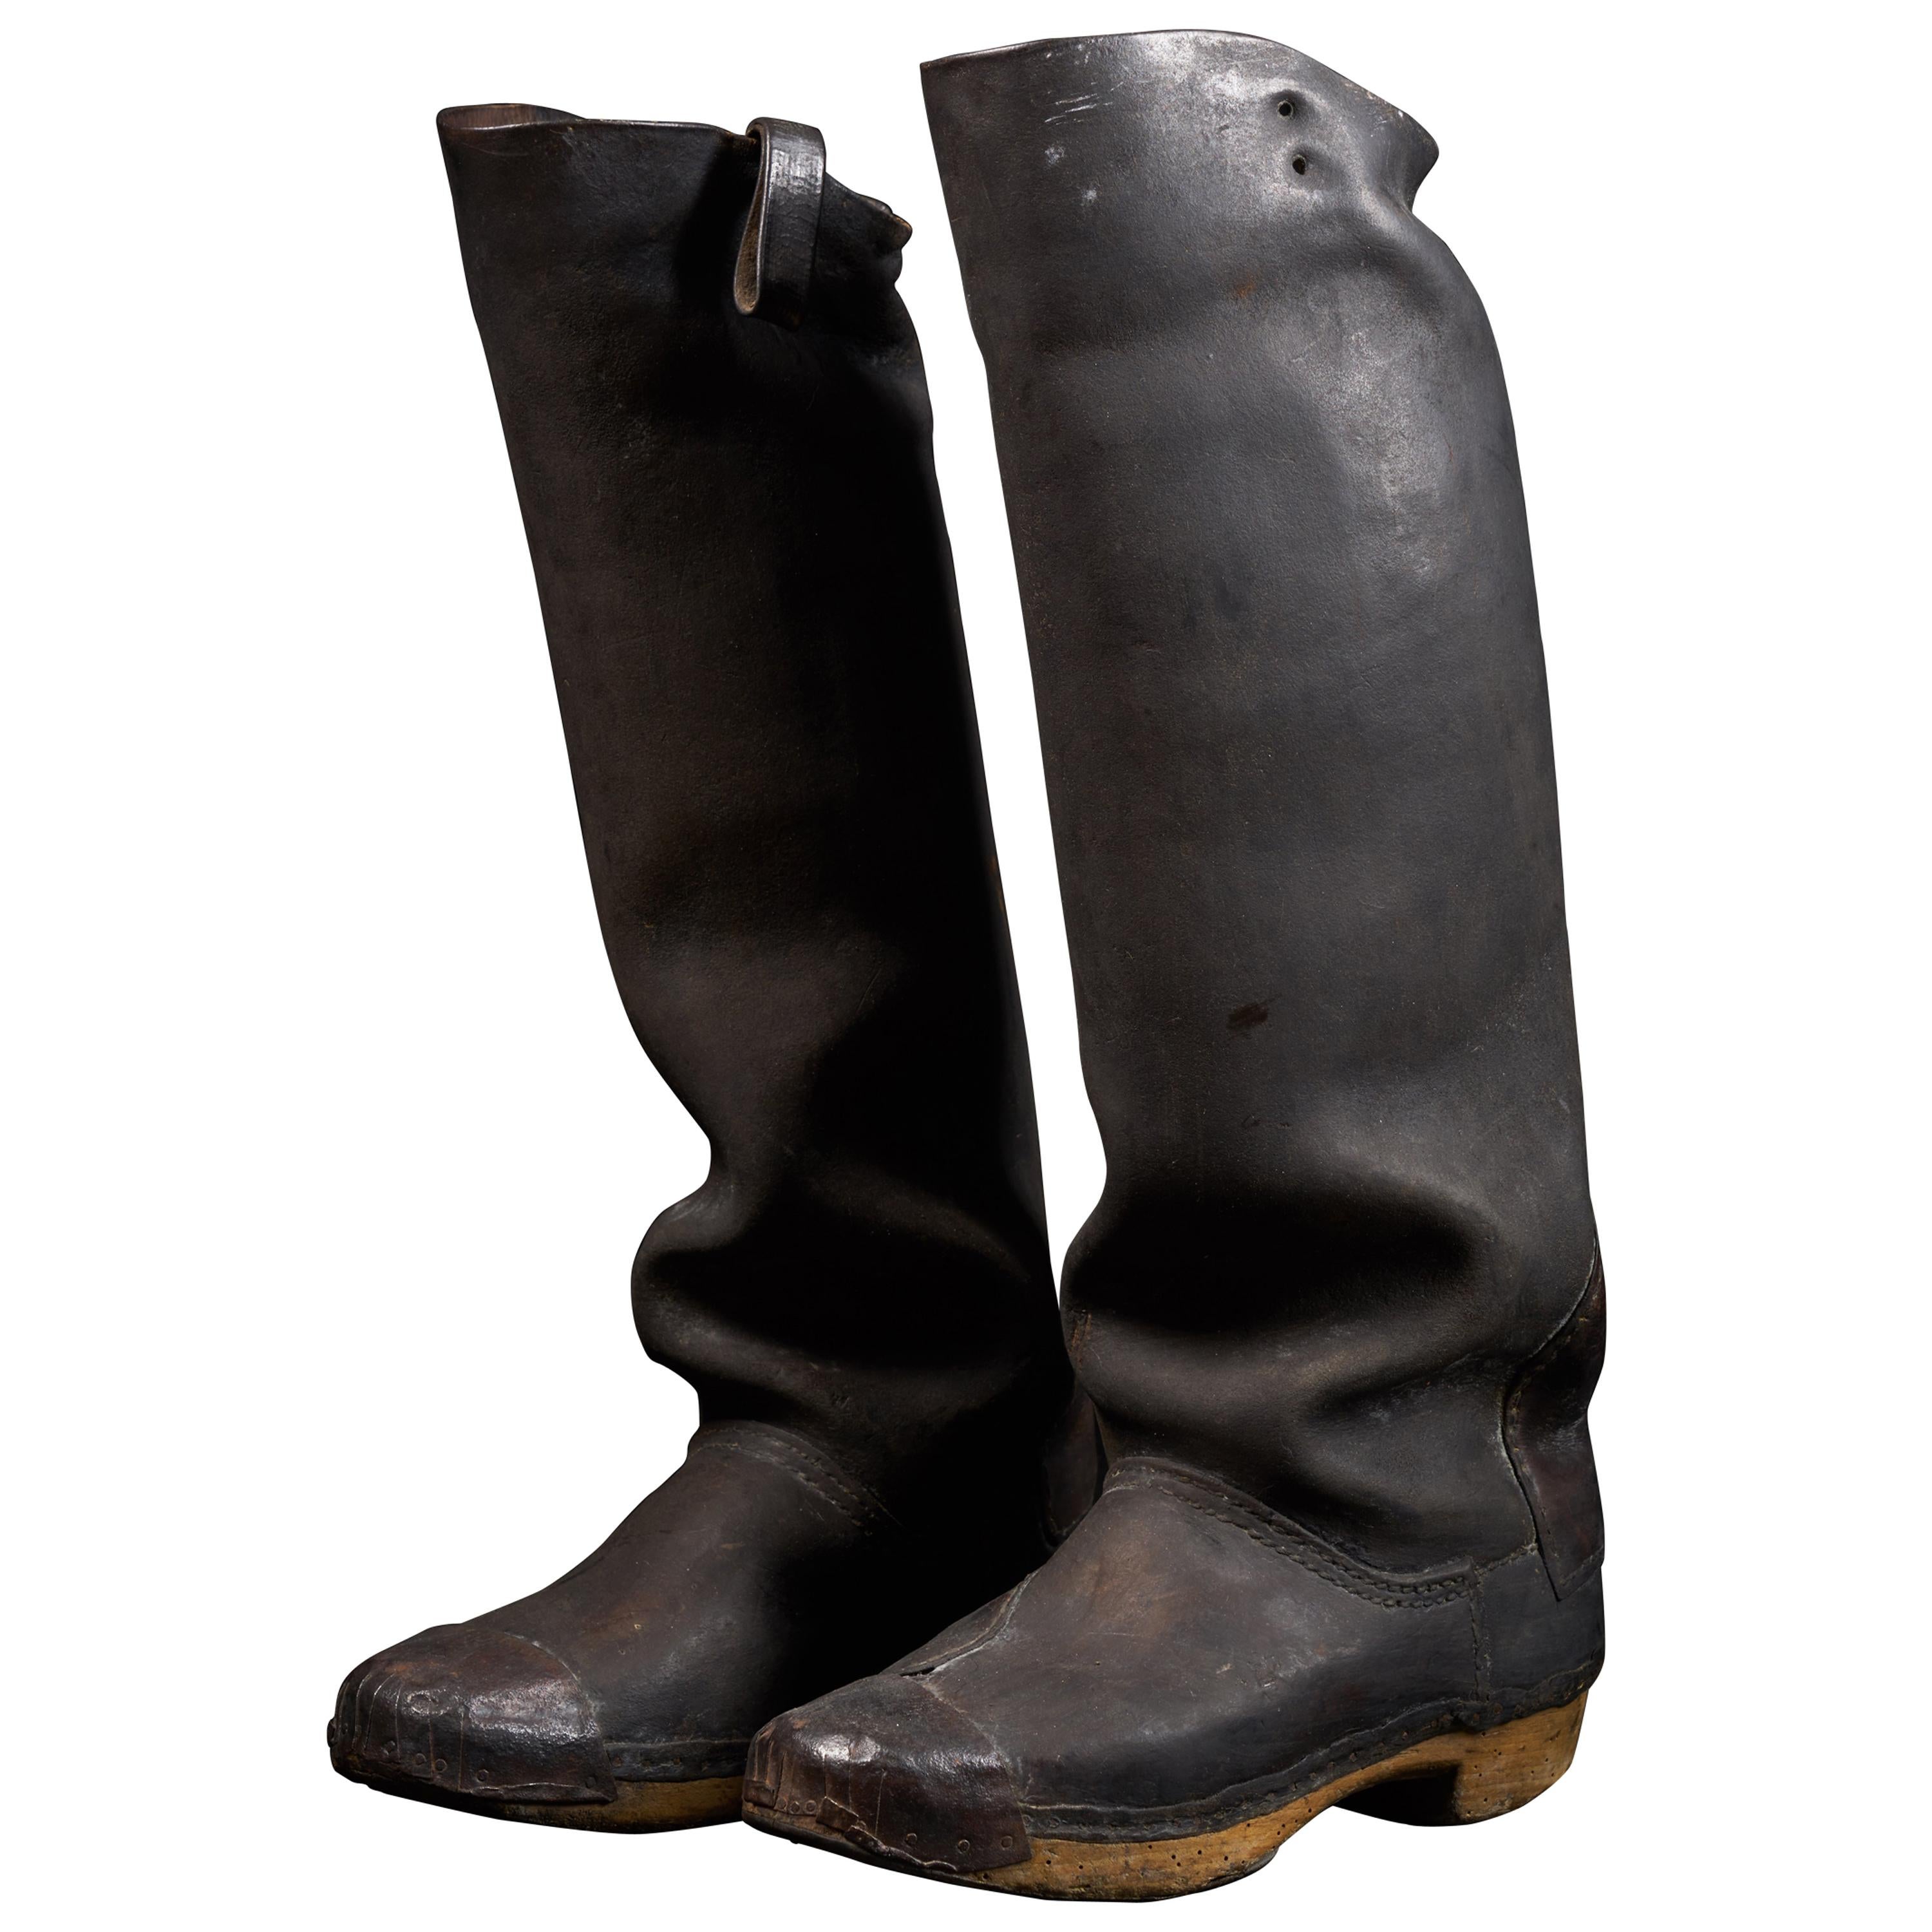 Pair of Leather High Working Boots with Iron Reenforced Soles